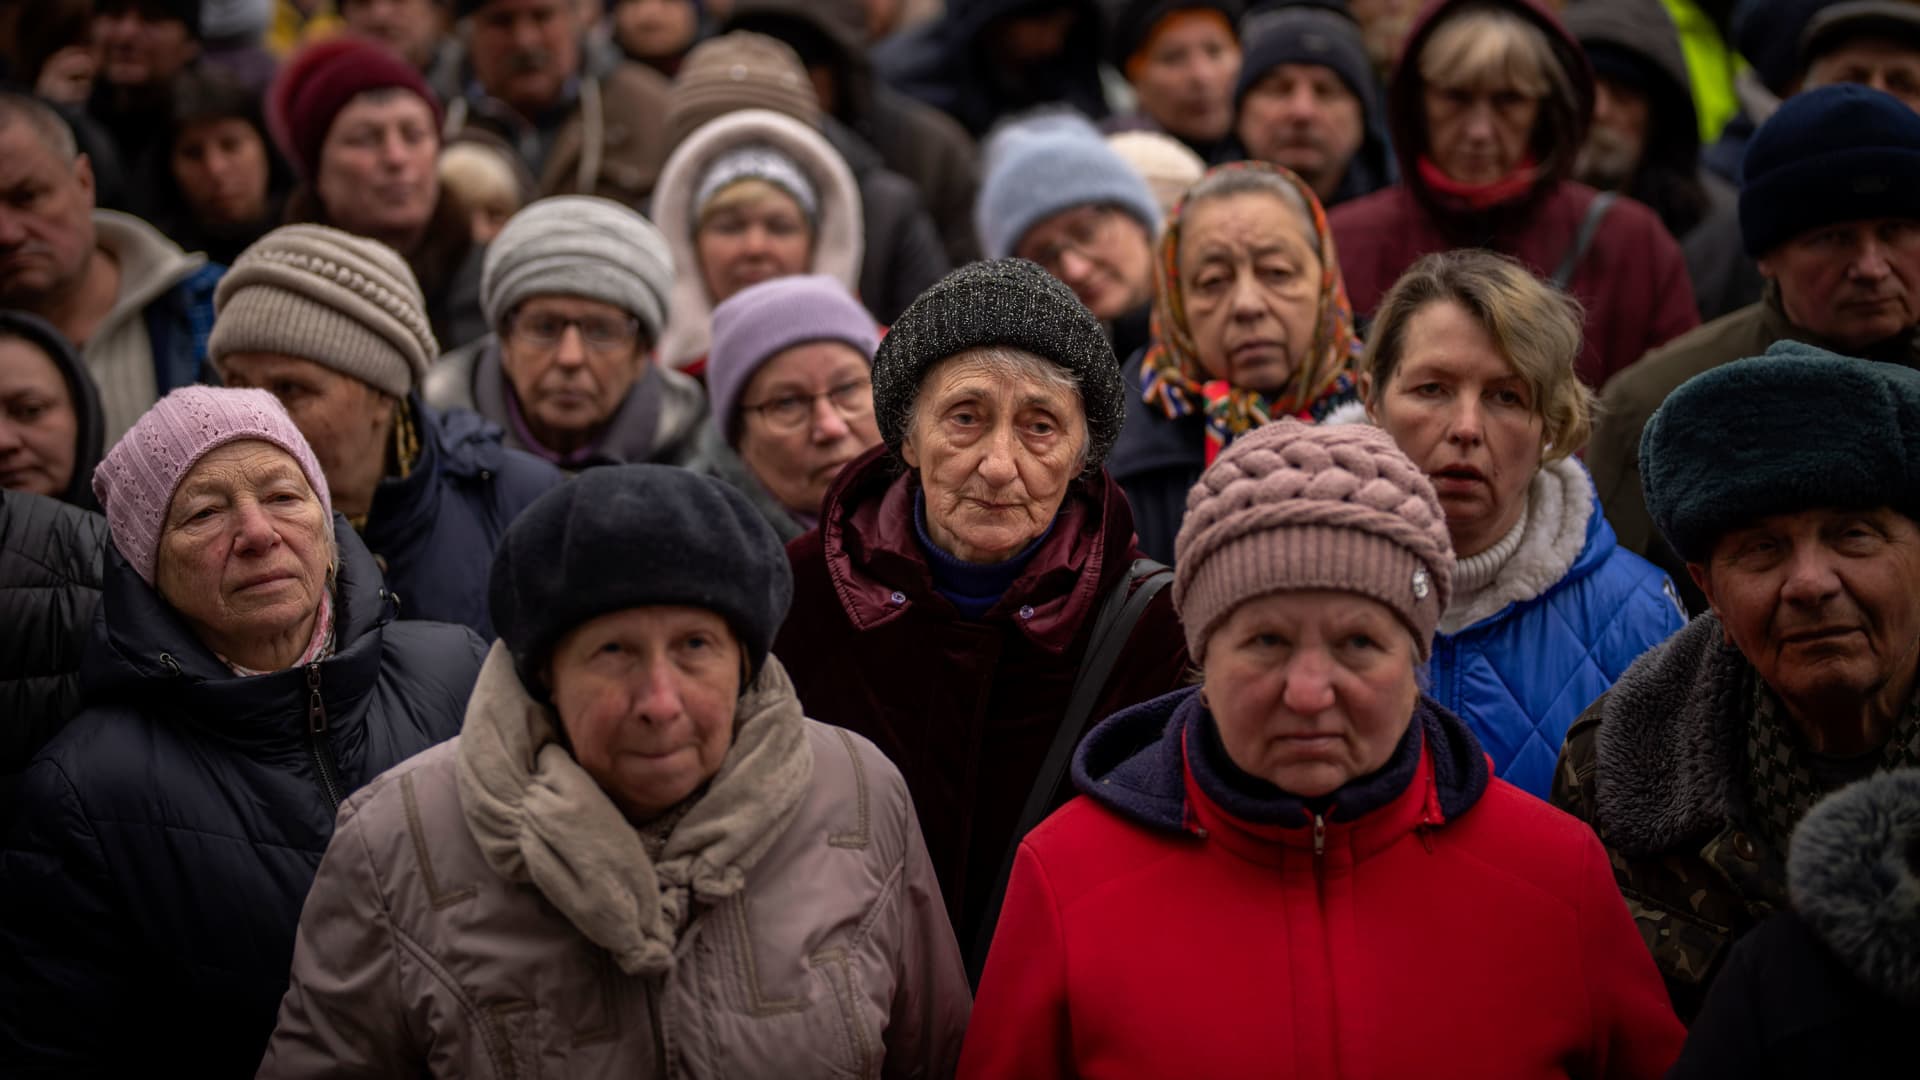 Ukrainians wait for a food distribution organized by the Red Cross in Bucha, on the outskirts of Kyiv, on Monday, April 18, 2022.